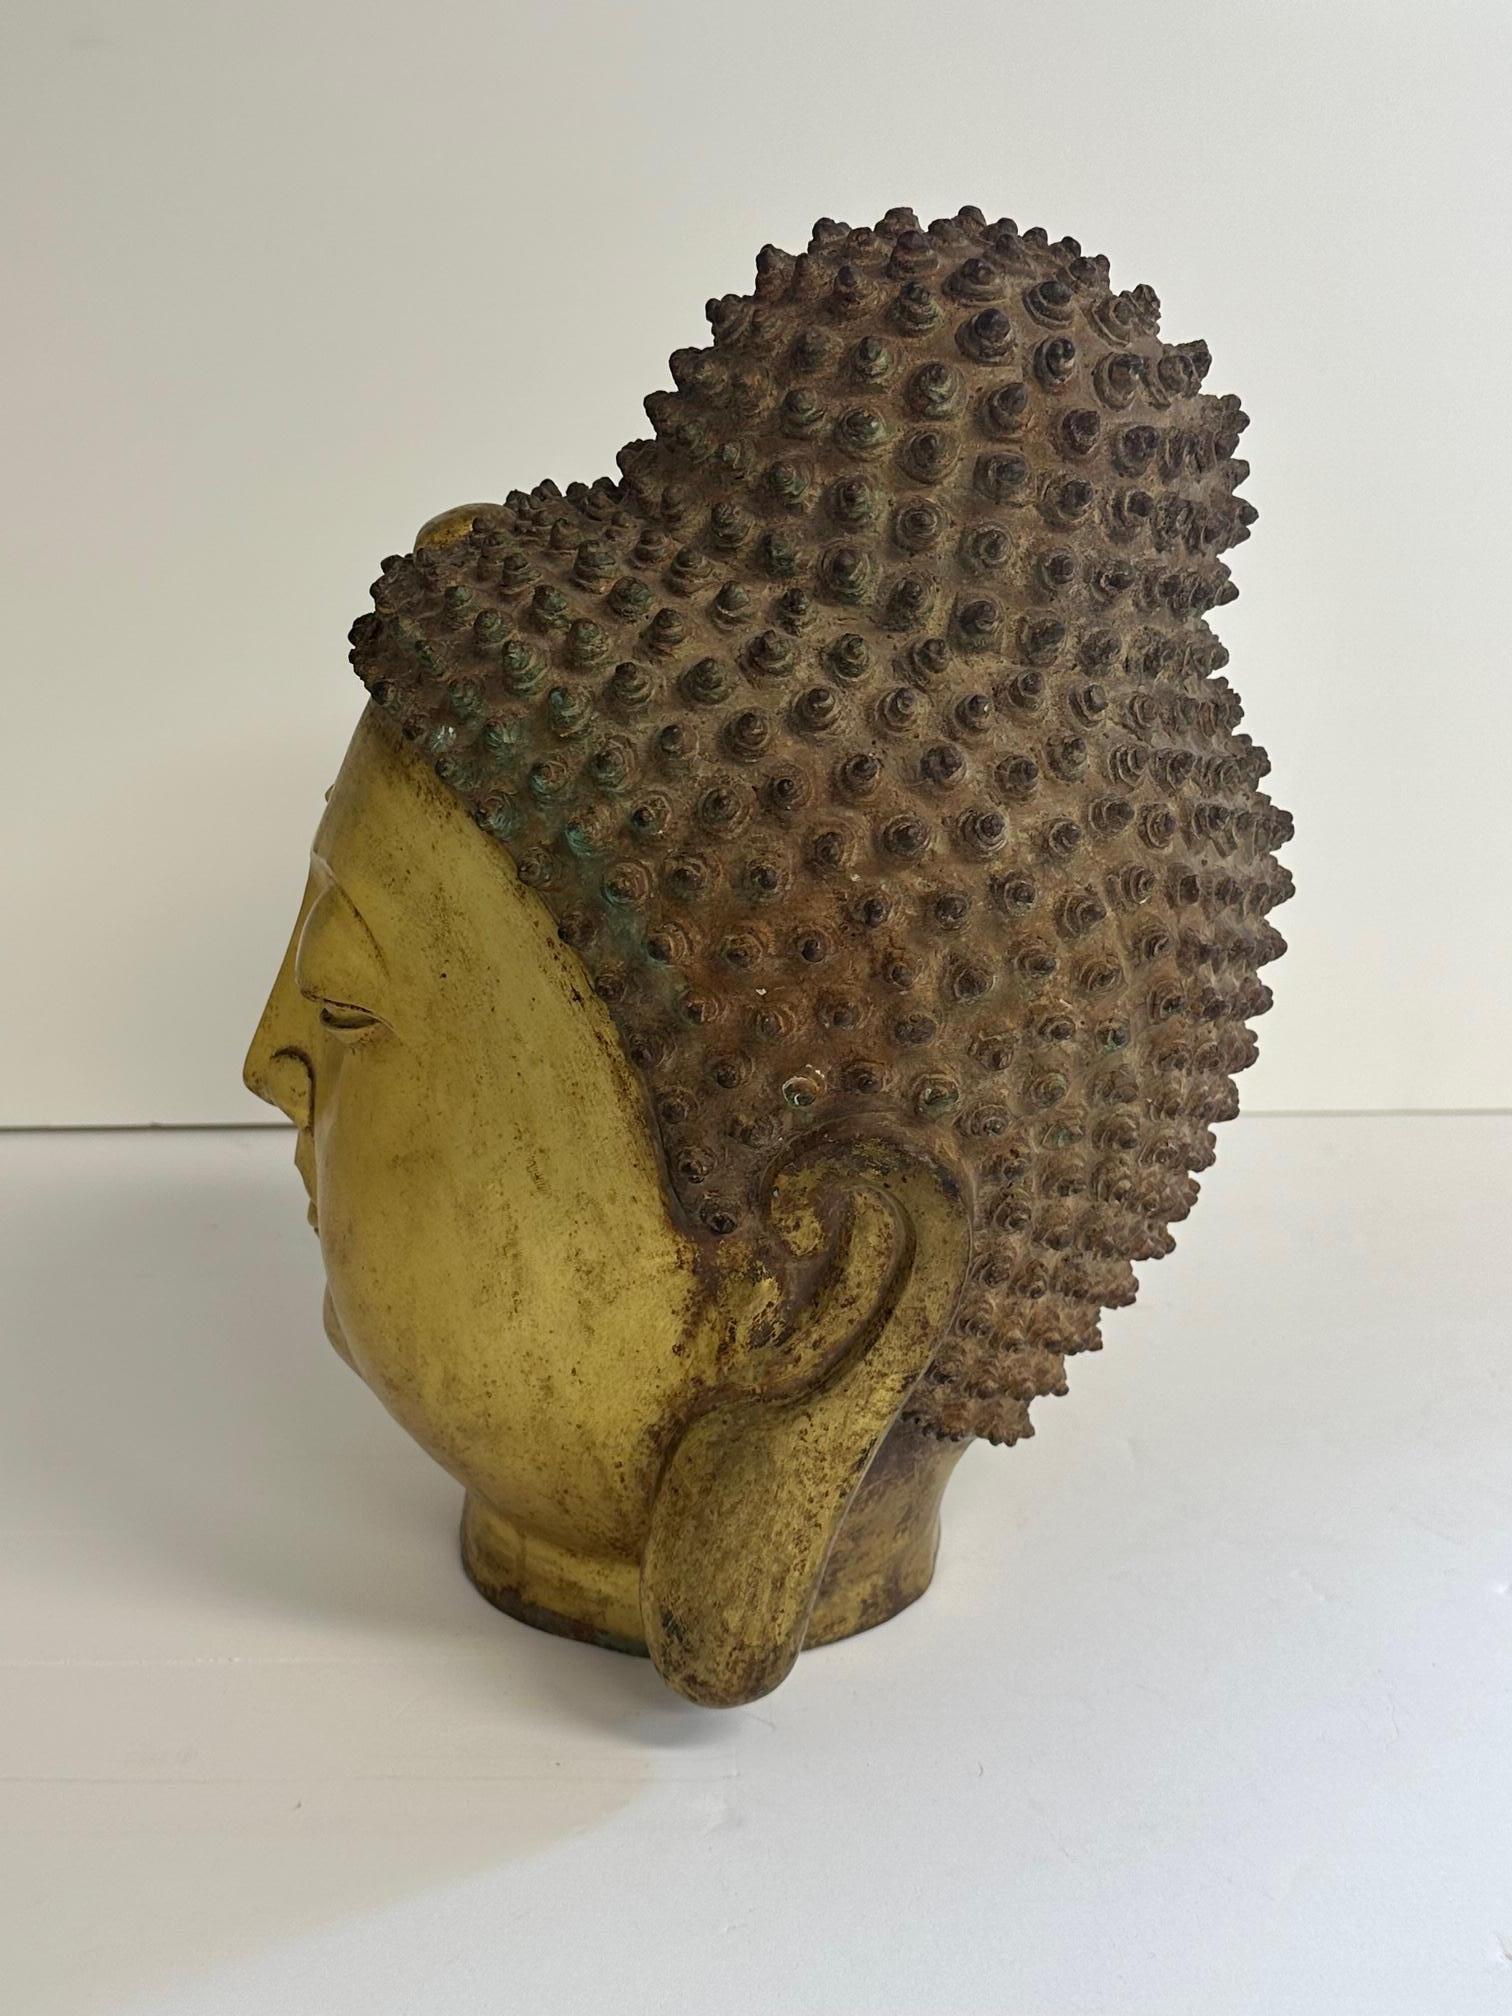 Ethereal cast brass Thai Buddha head having gorgeous patina and meticulous detail.  The closed eyes give an incredible sense of serenity in the sculpture.